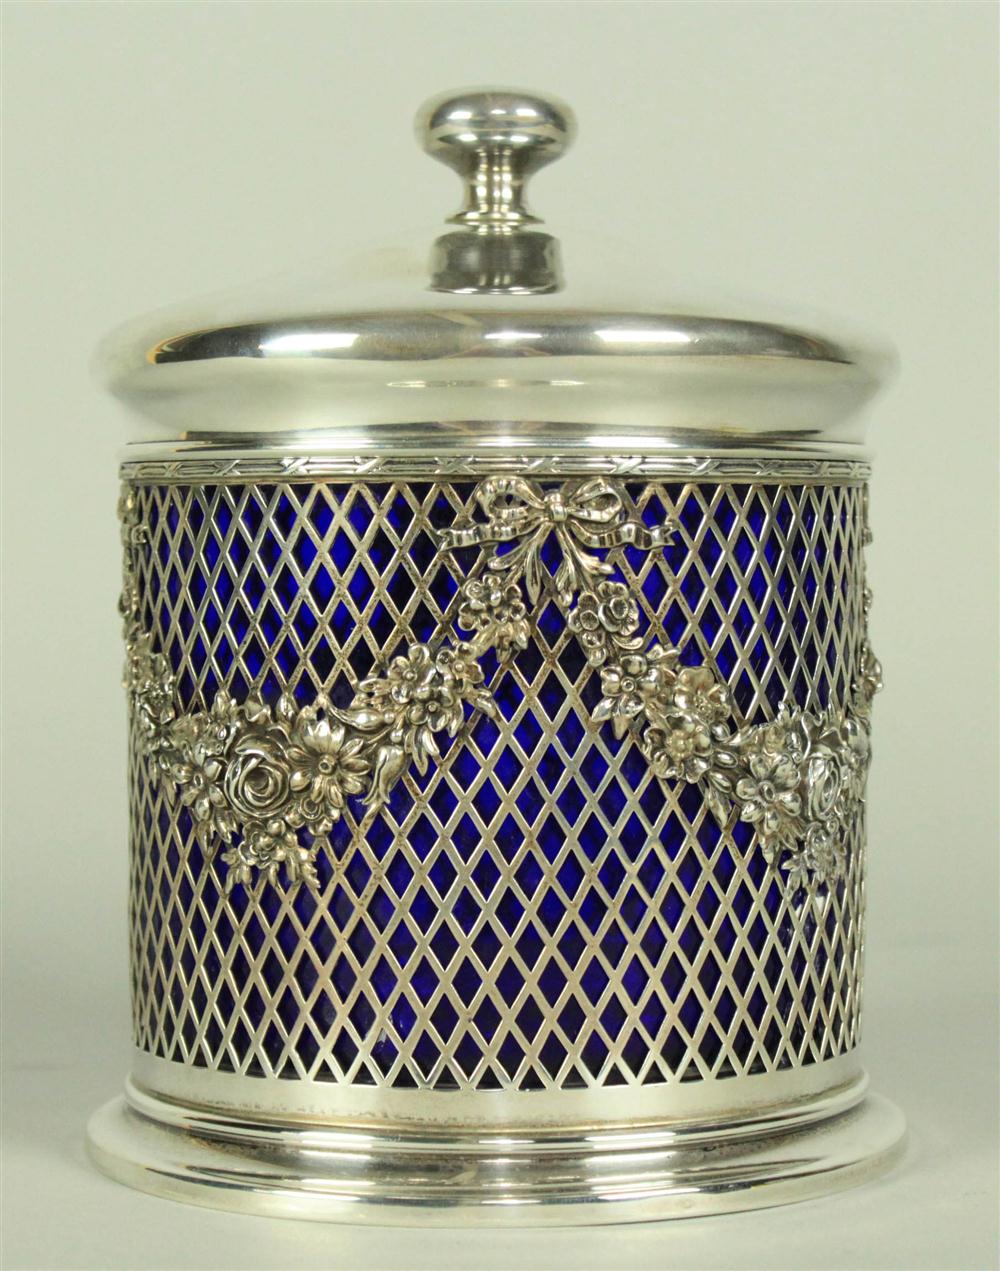 HOWARD & CO. SILVER RETICULATED